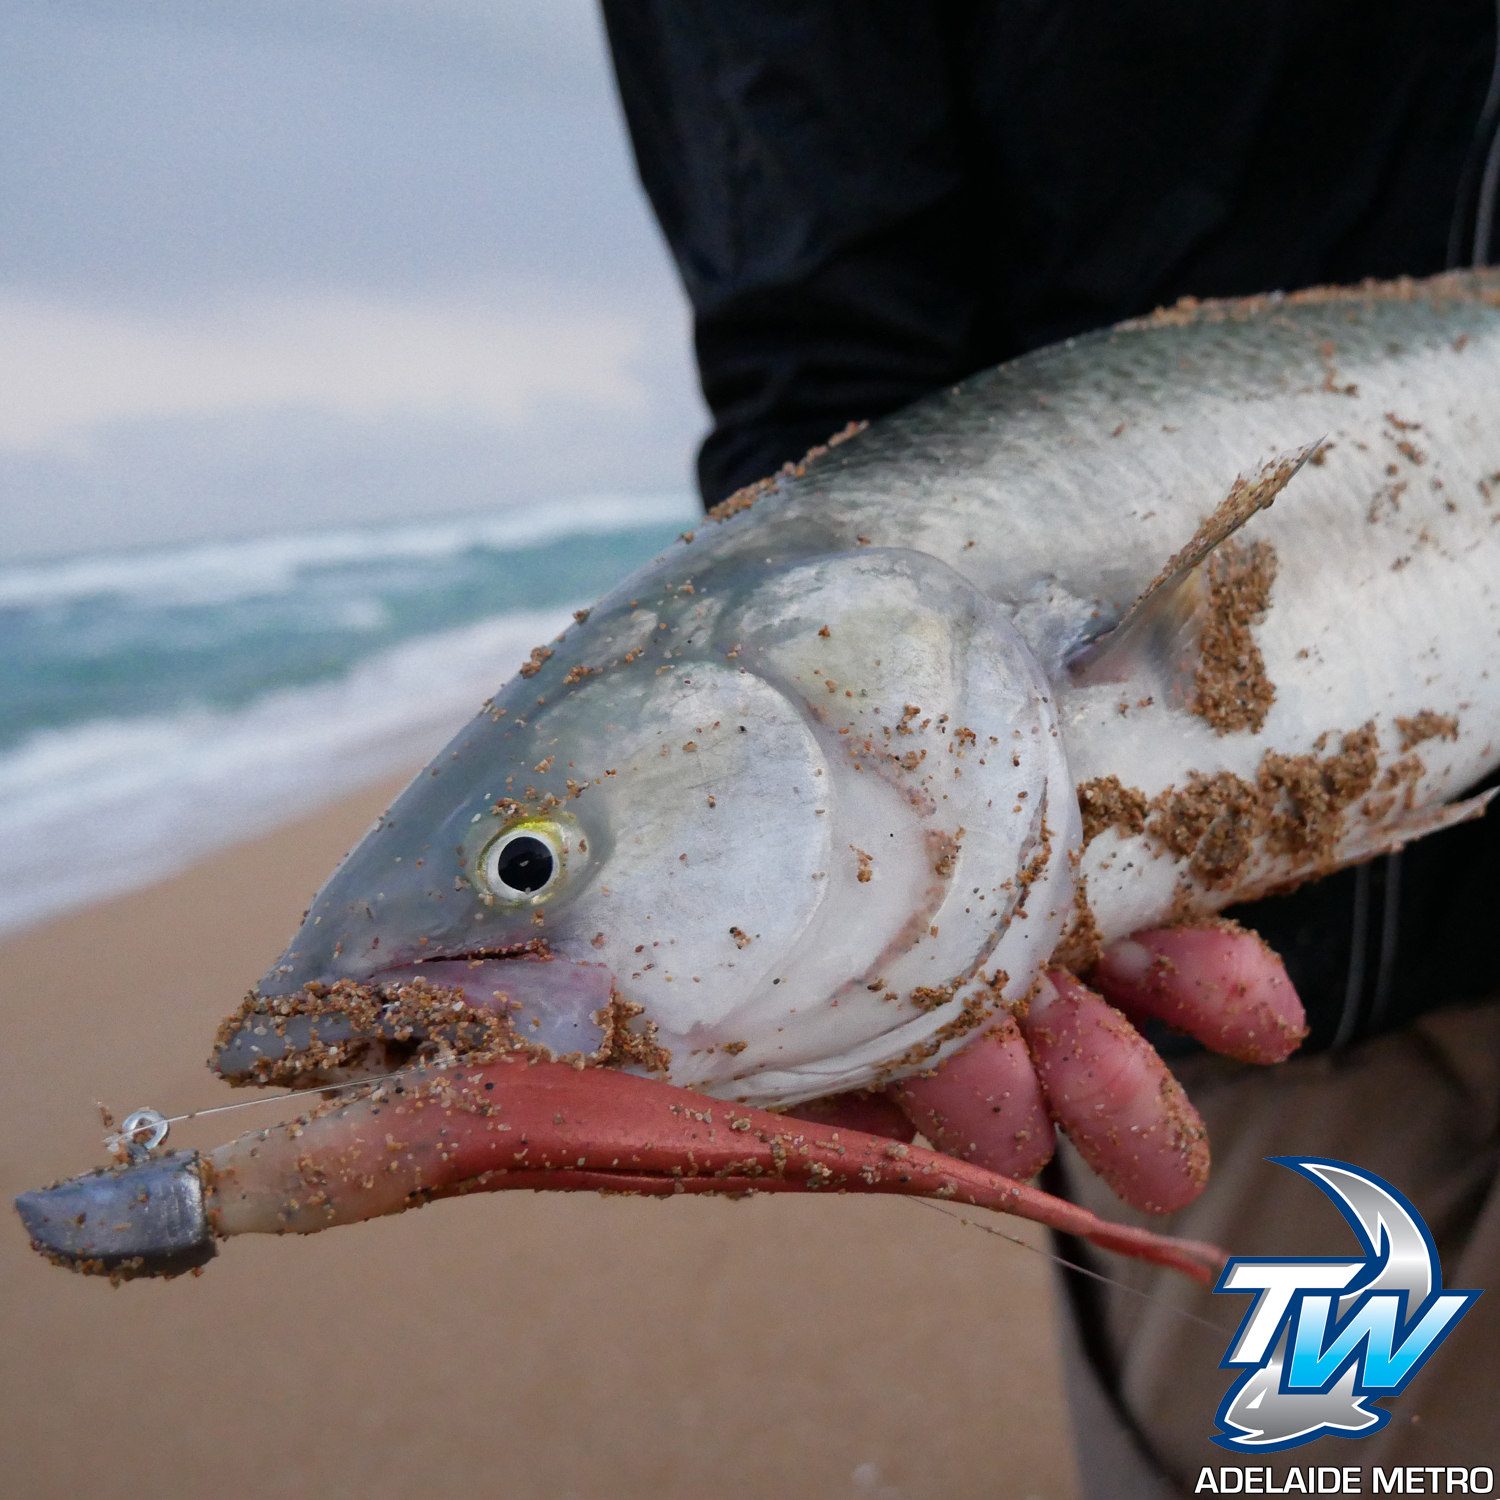 Browns Beach Salmon - Using lures at one of SA's premier salmon